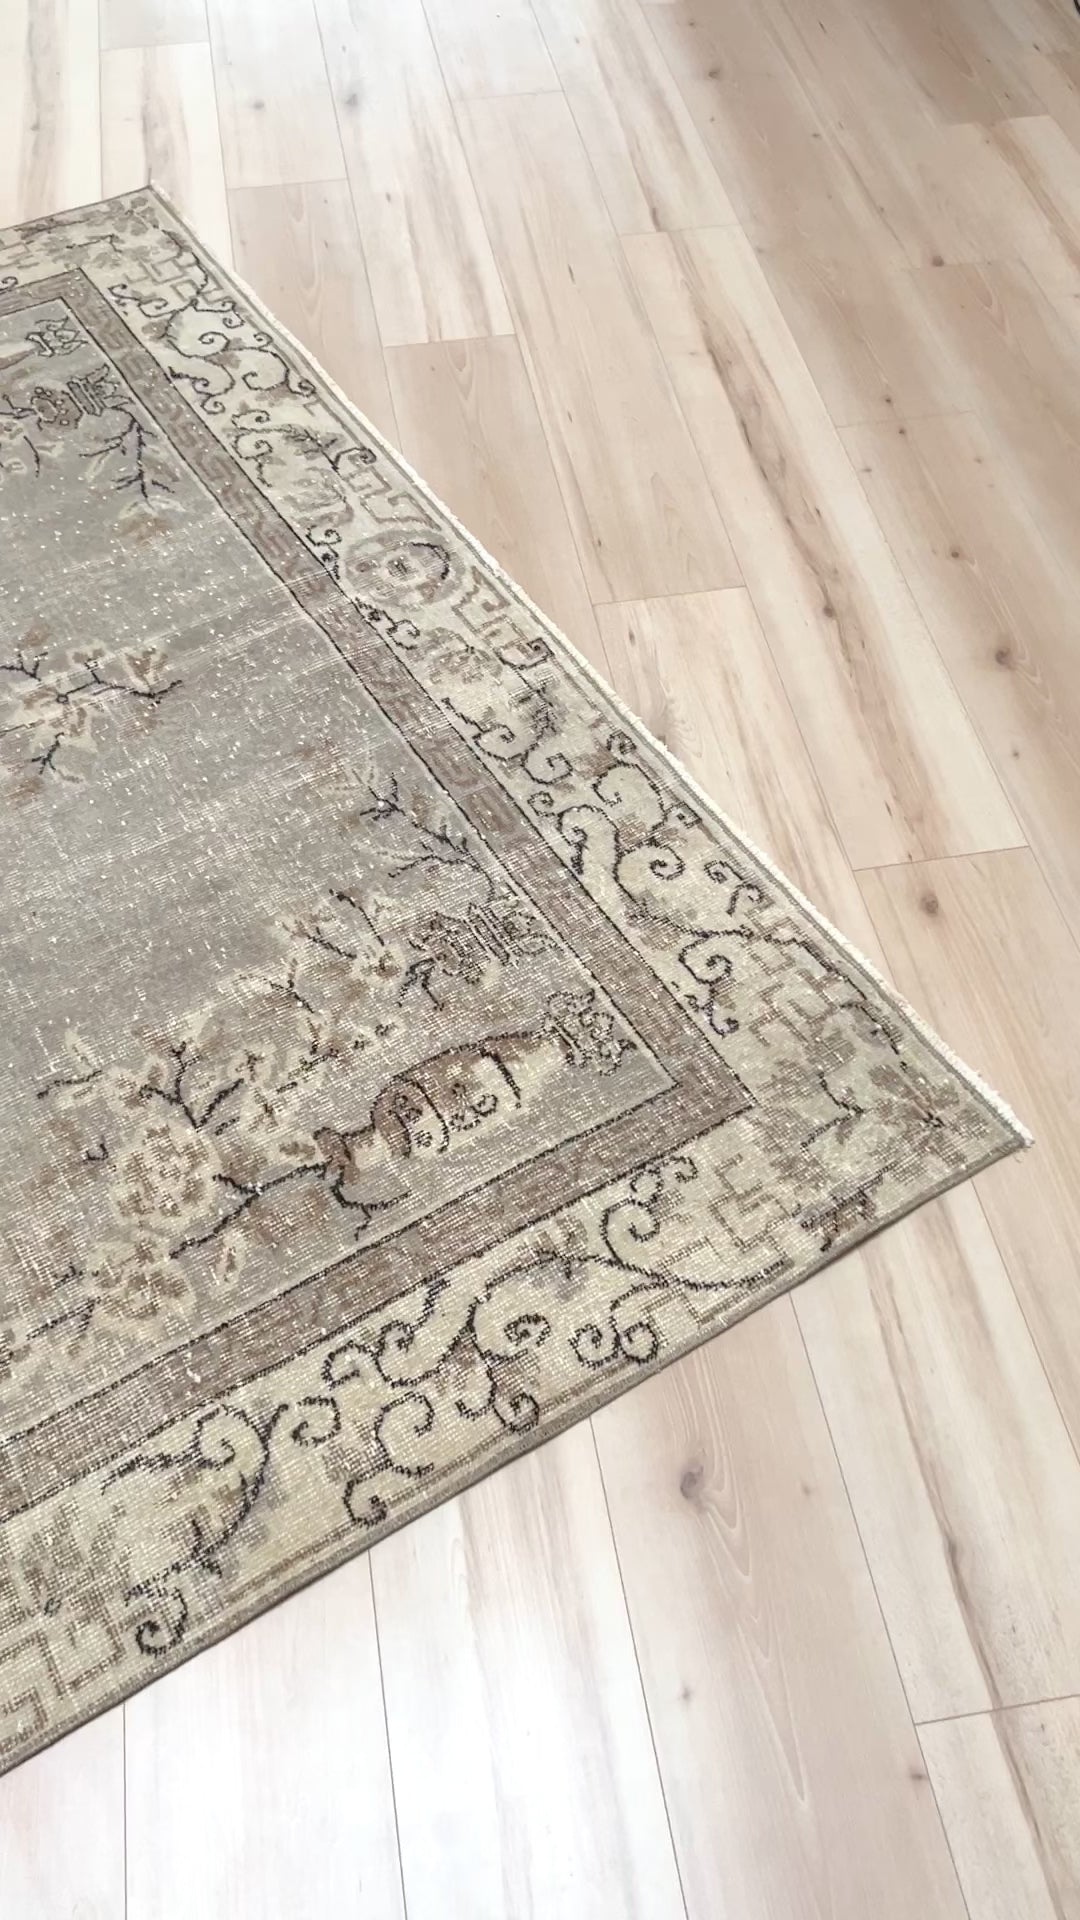 Vase vintage muted anatolian rug. Turkish rug shop san francisco bay area. Large distressed overdyed rug for living room, bedroom, dining of office. Interior design ideas, homedecor shop palo alto, los latos, los gatos. Buy handmade rug online free shipping to USA and Canada. 